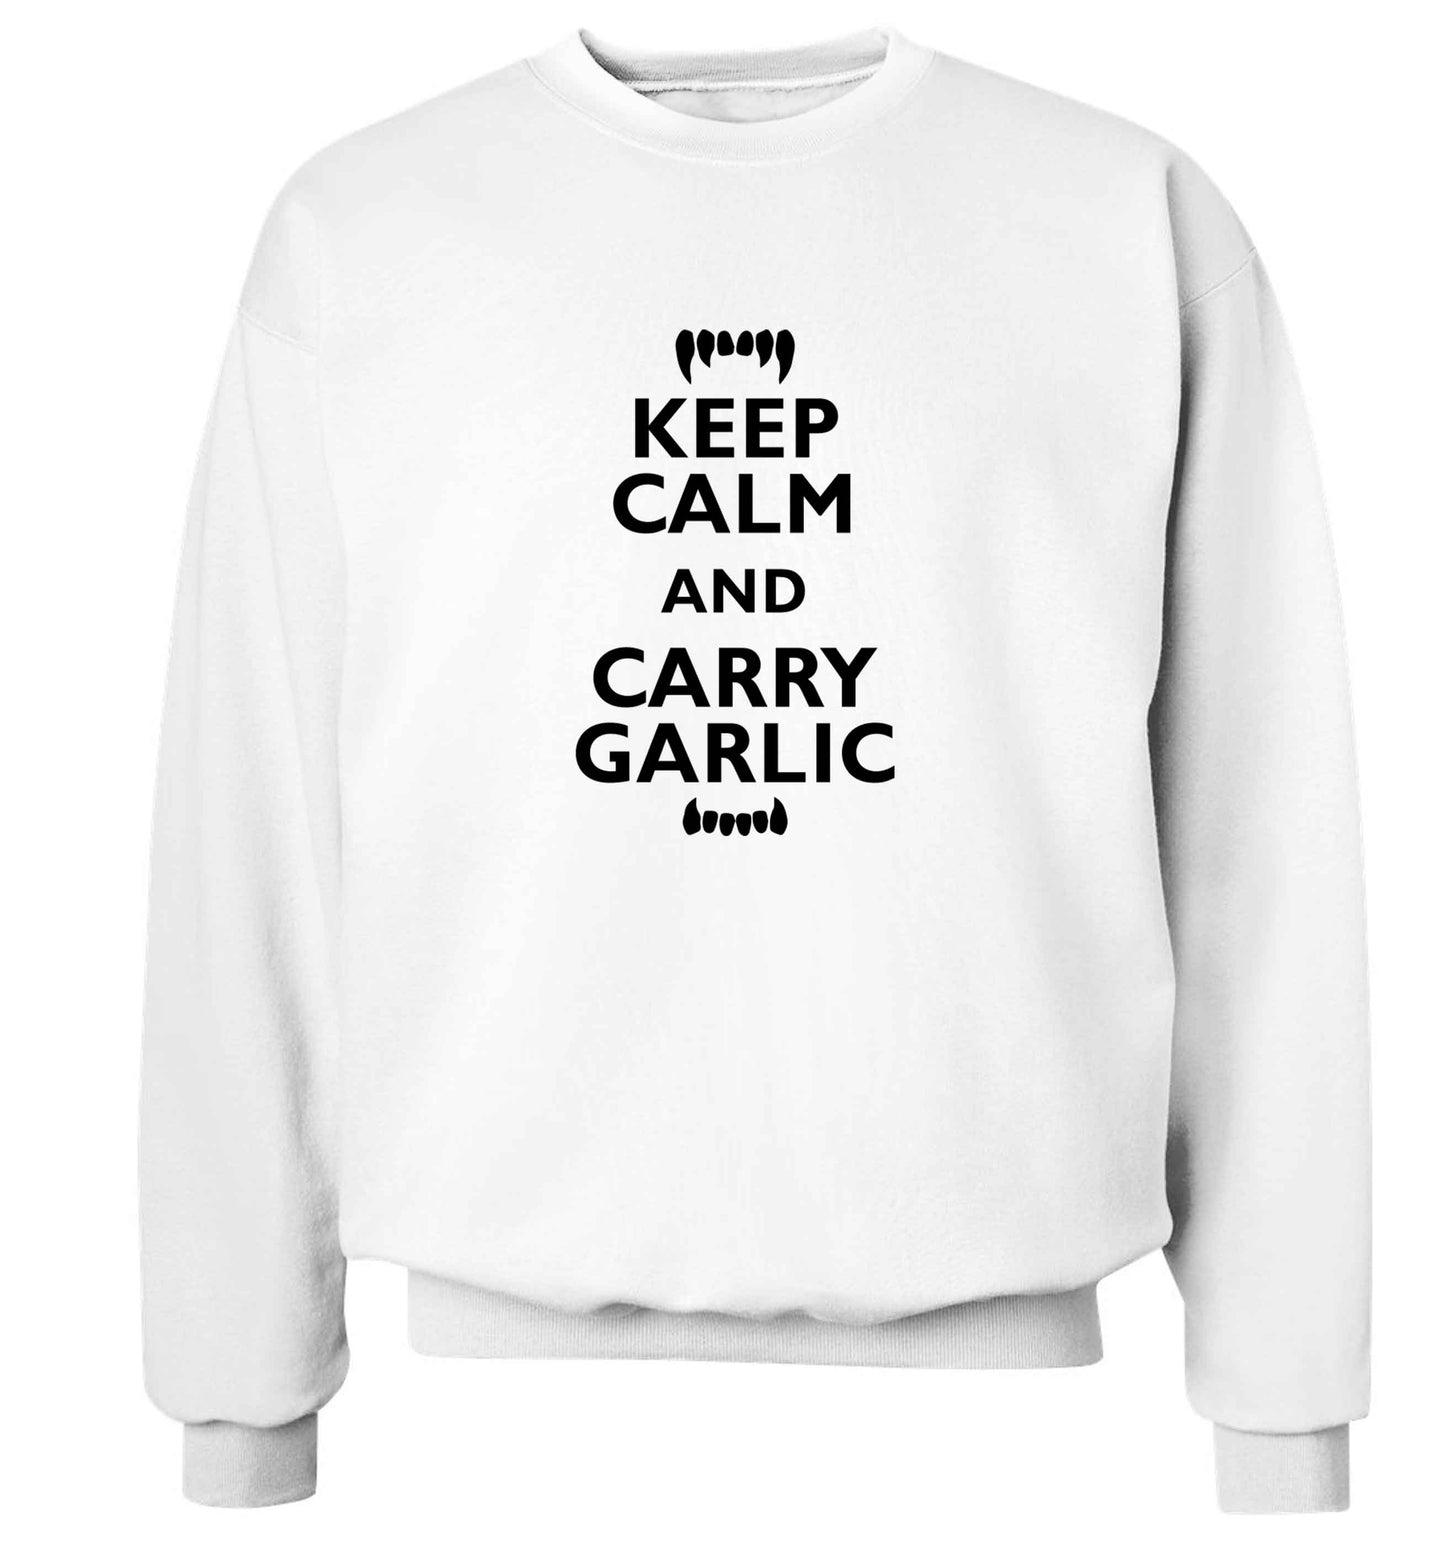 Keep calm and carry garlic adult's unisex white sweater 2XL